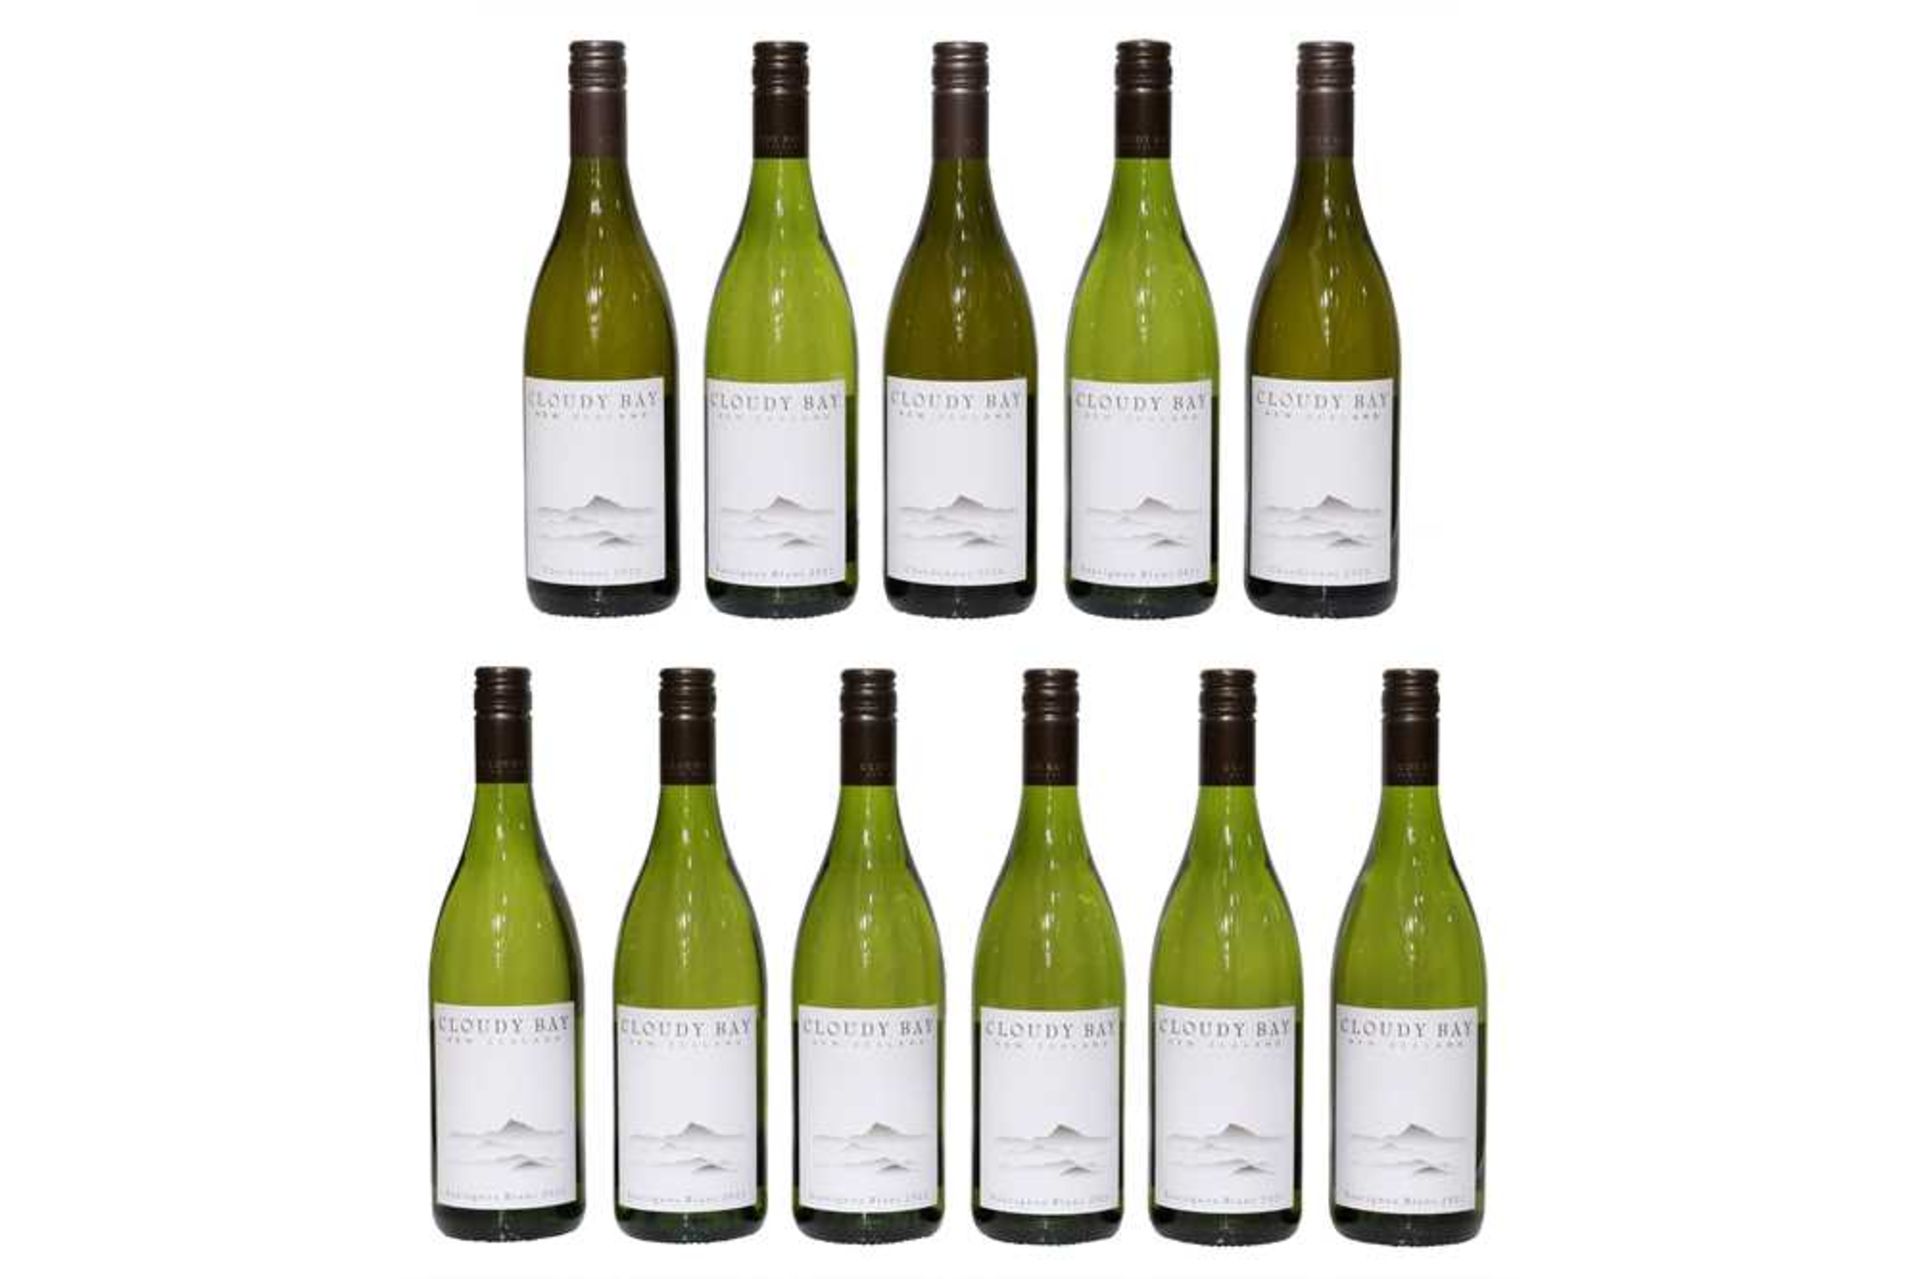 Cloudy Bay Sauvignon Blanc, Marlborough, 2021 and 2020, eleven bottles in total